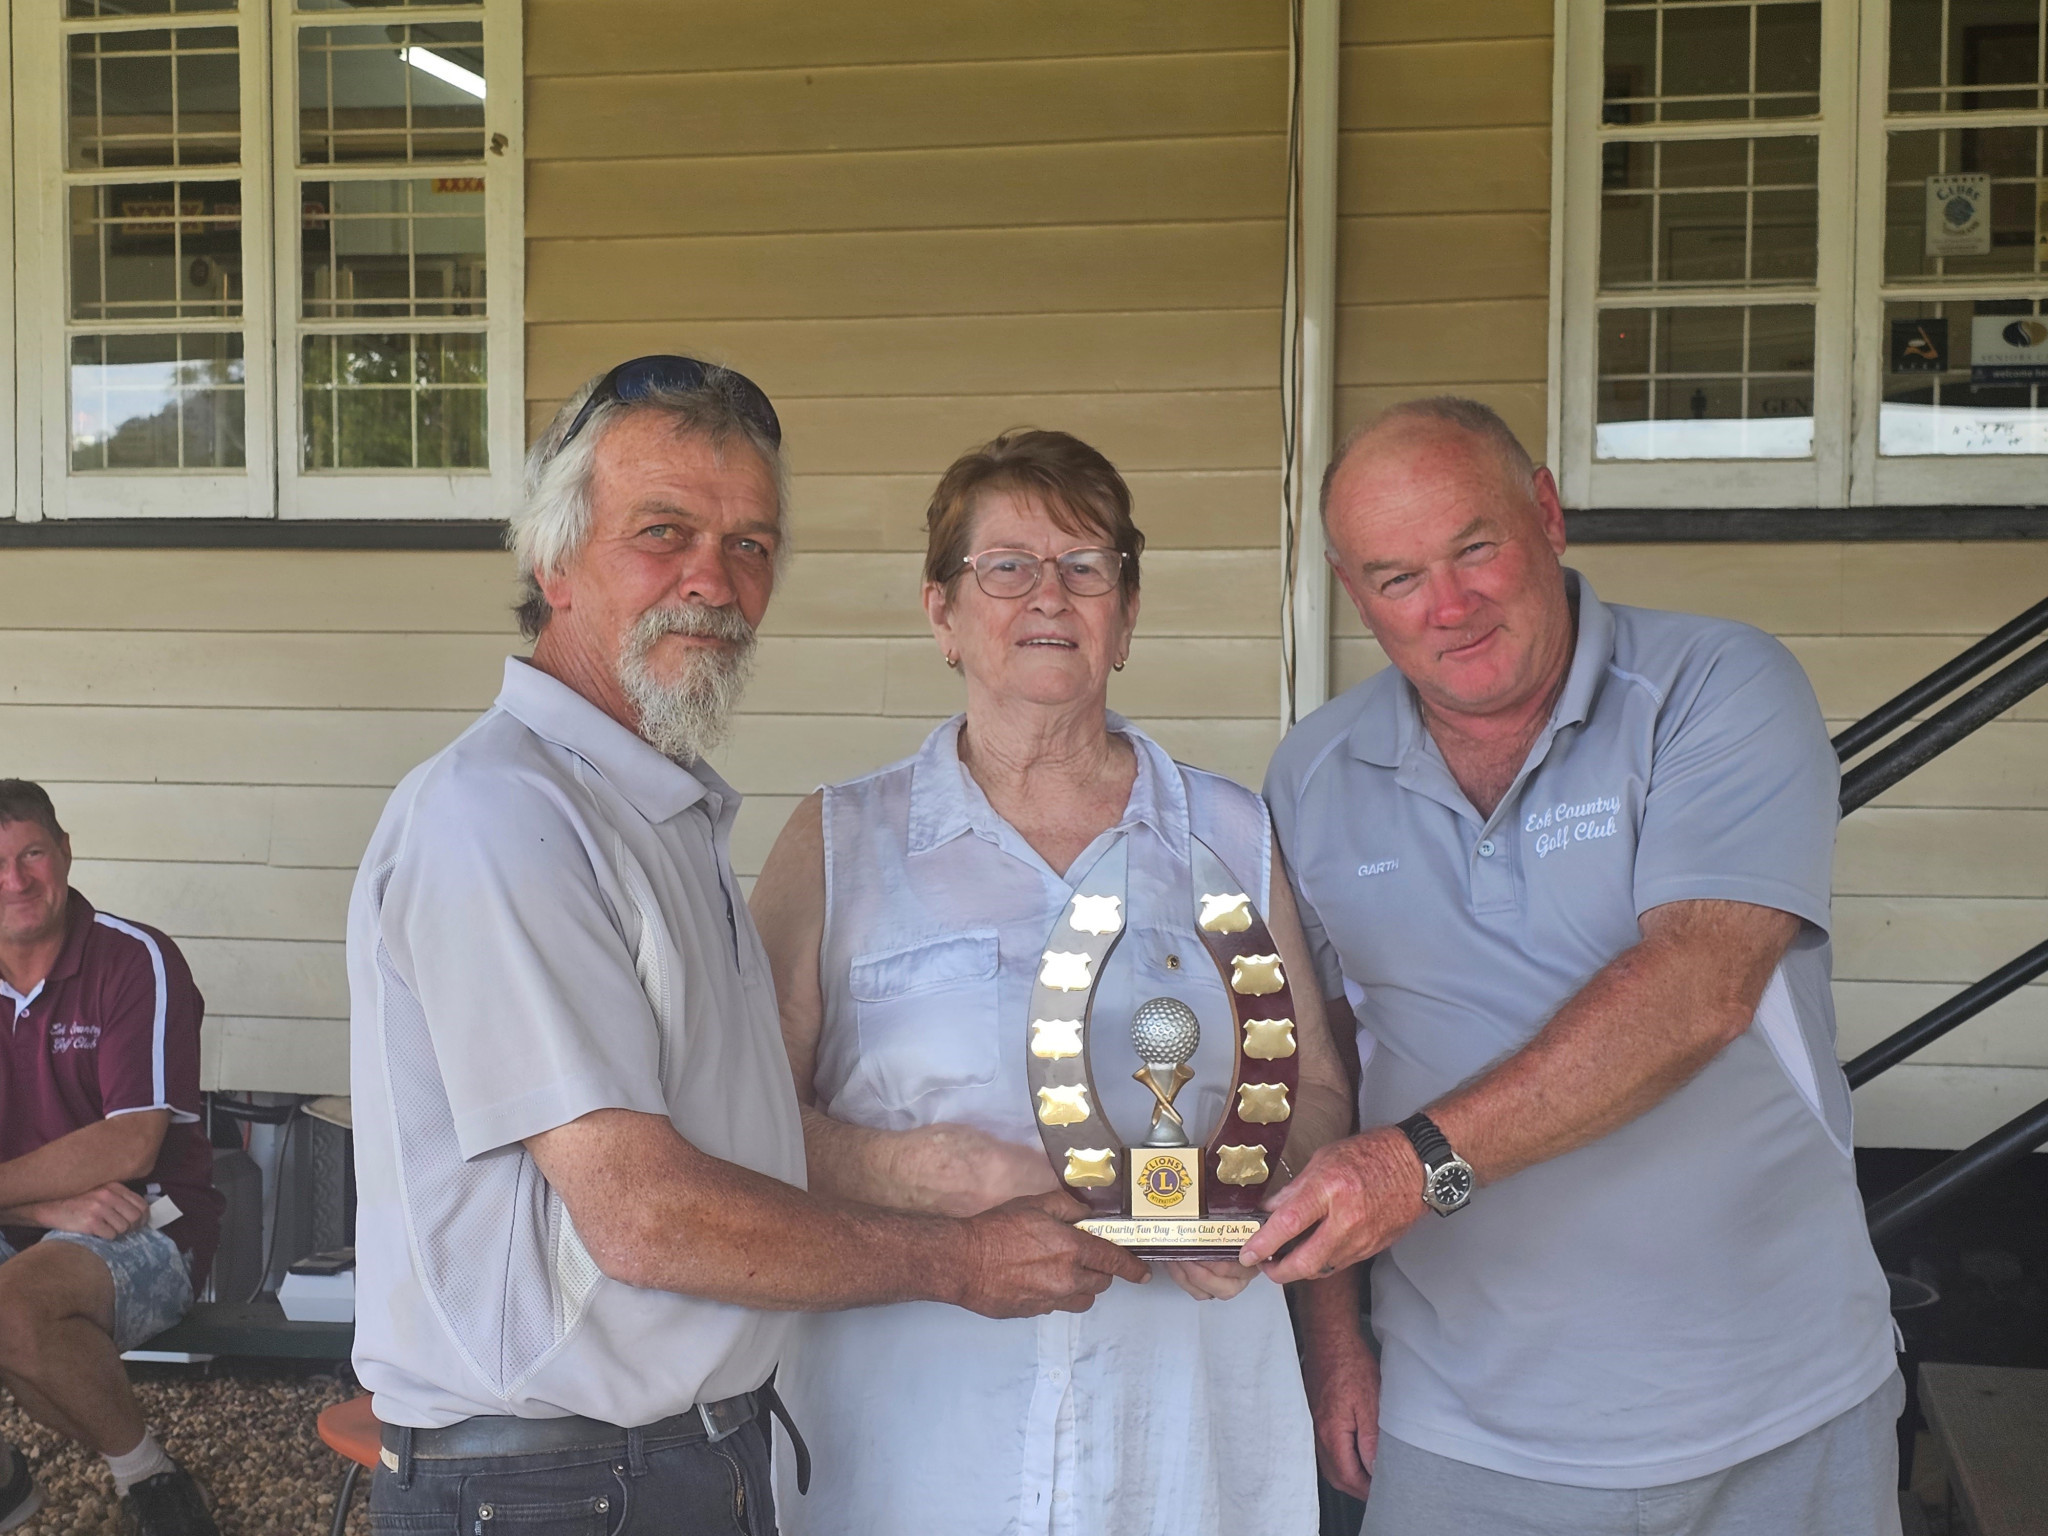 Esk charity golf winners Brett Farnham and Garth Wilson with Lucille Hedges (middle).